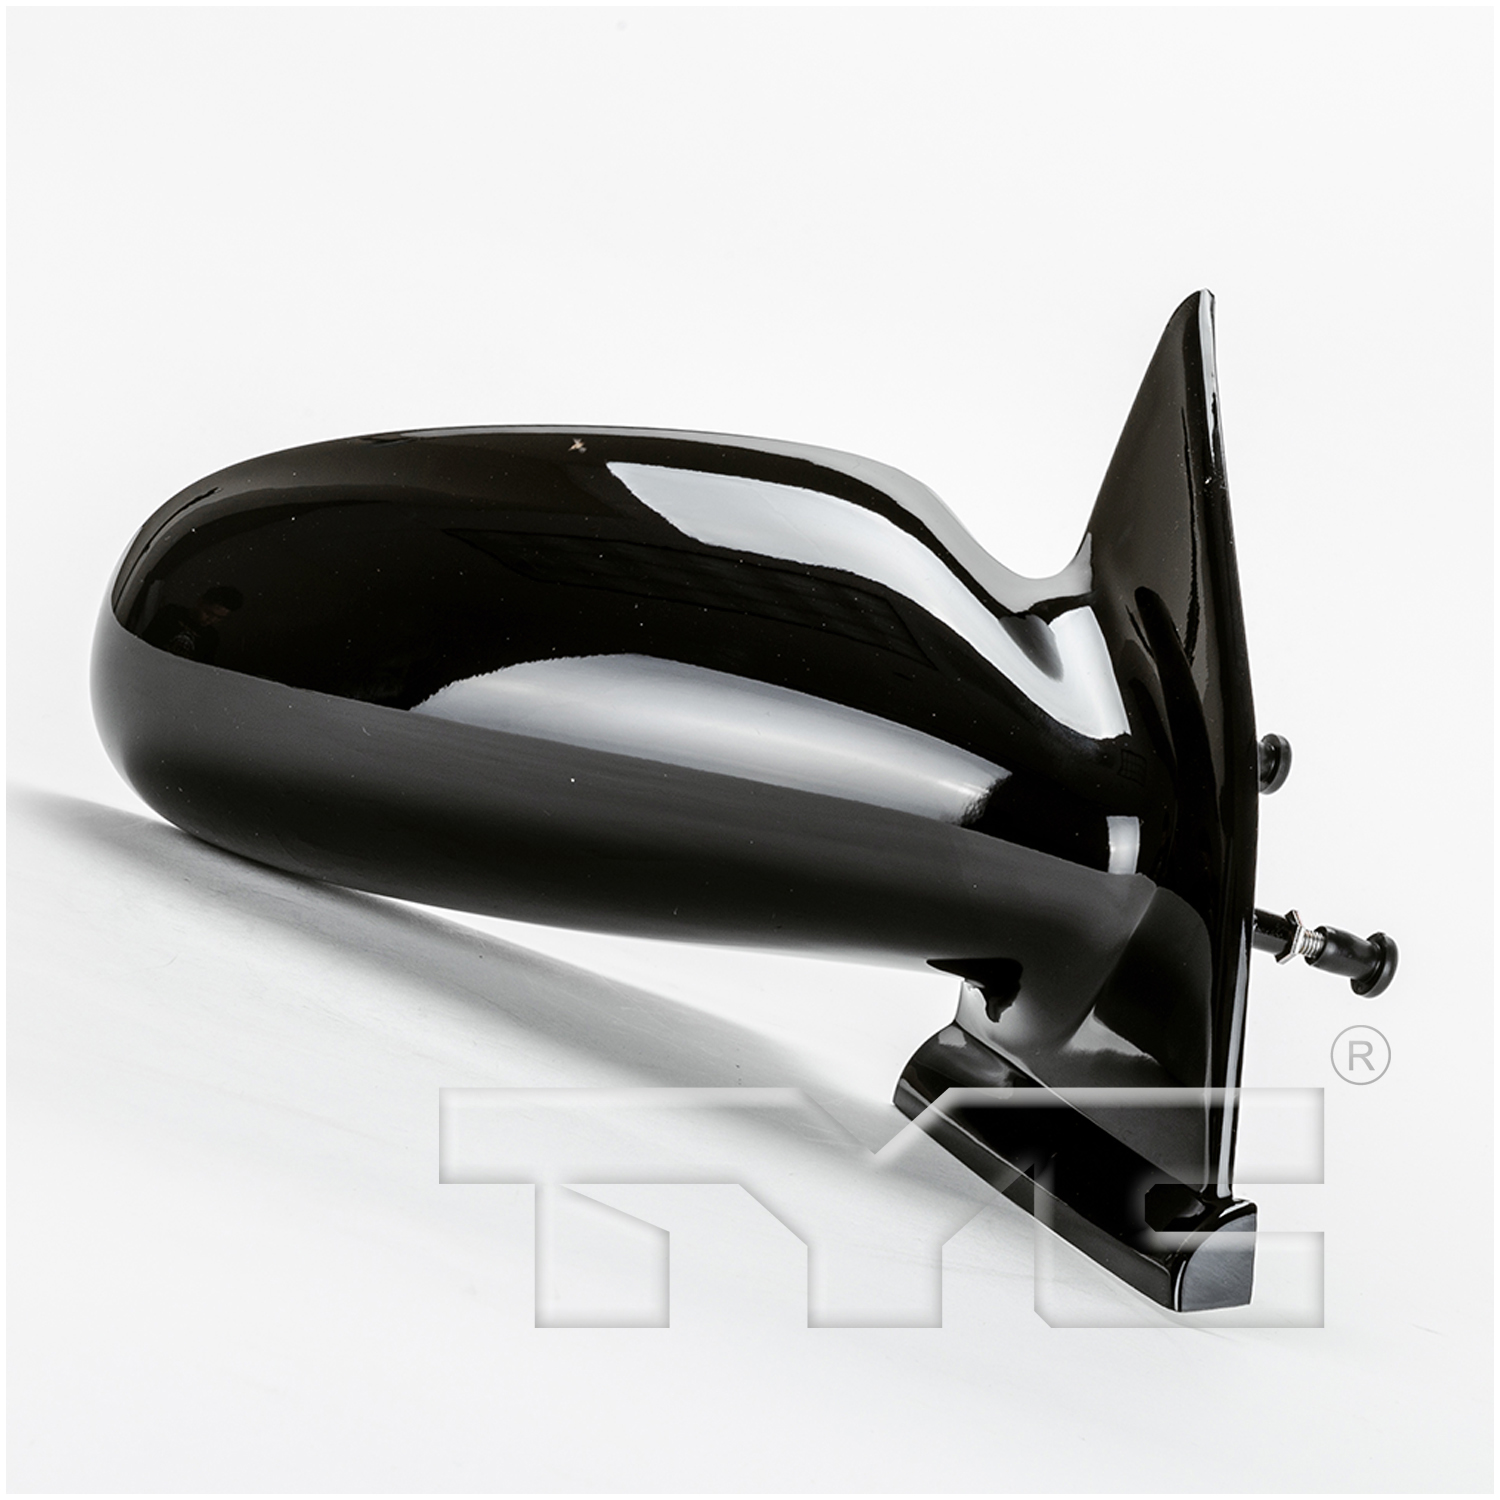 Aftermarket MIRRORS for SATURN - SL2, SL2,96-02,RT Mirror outside rear view